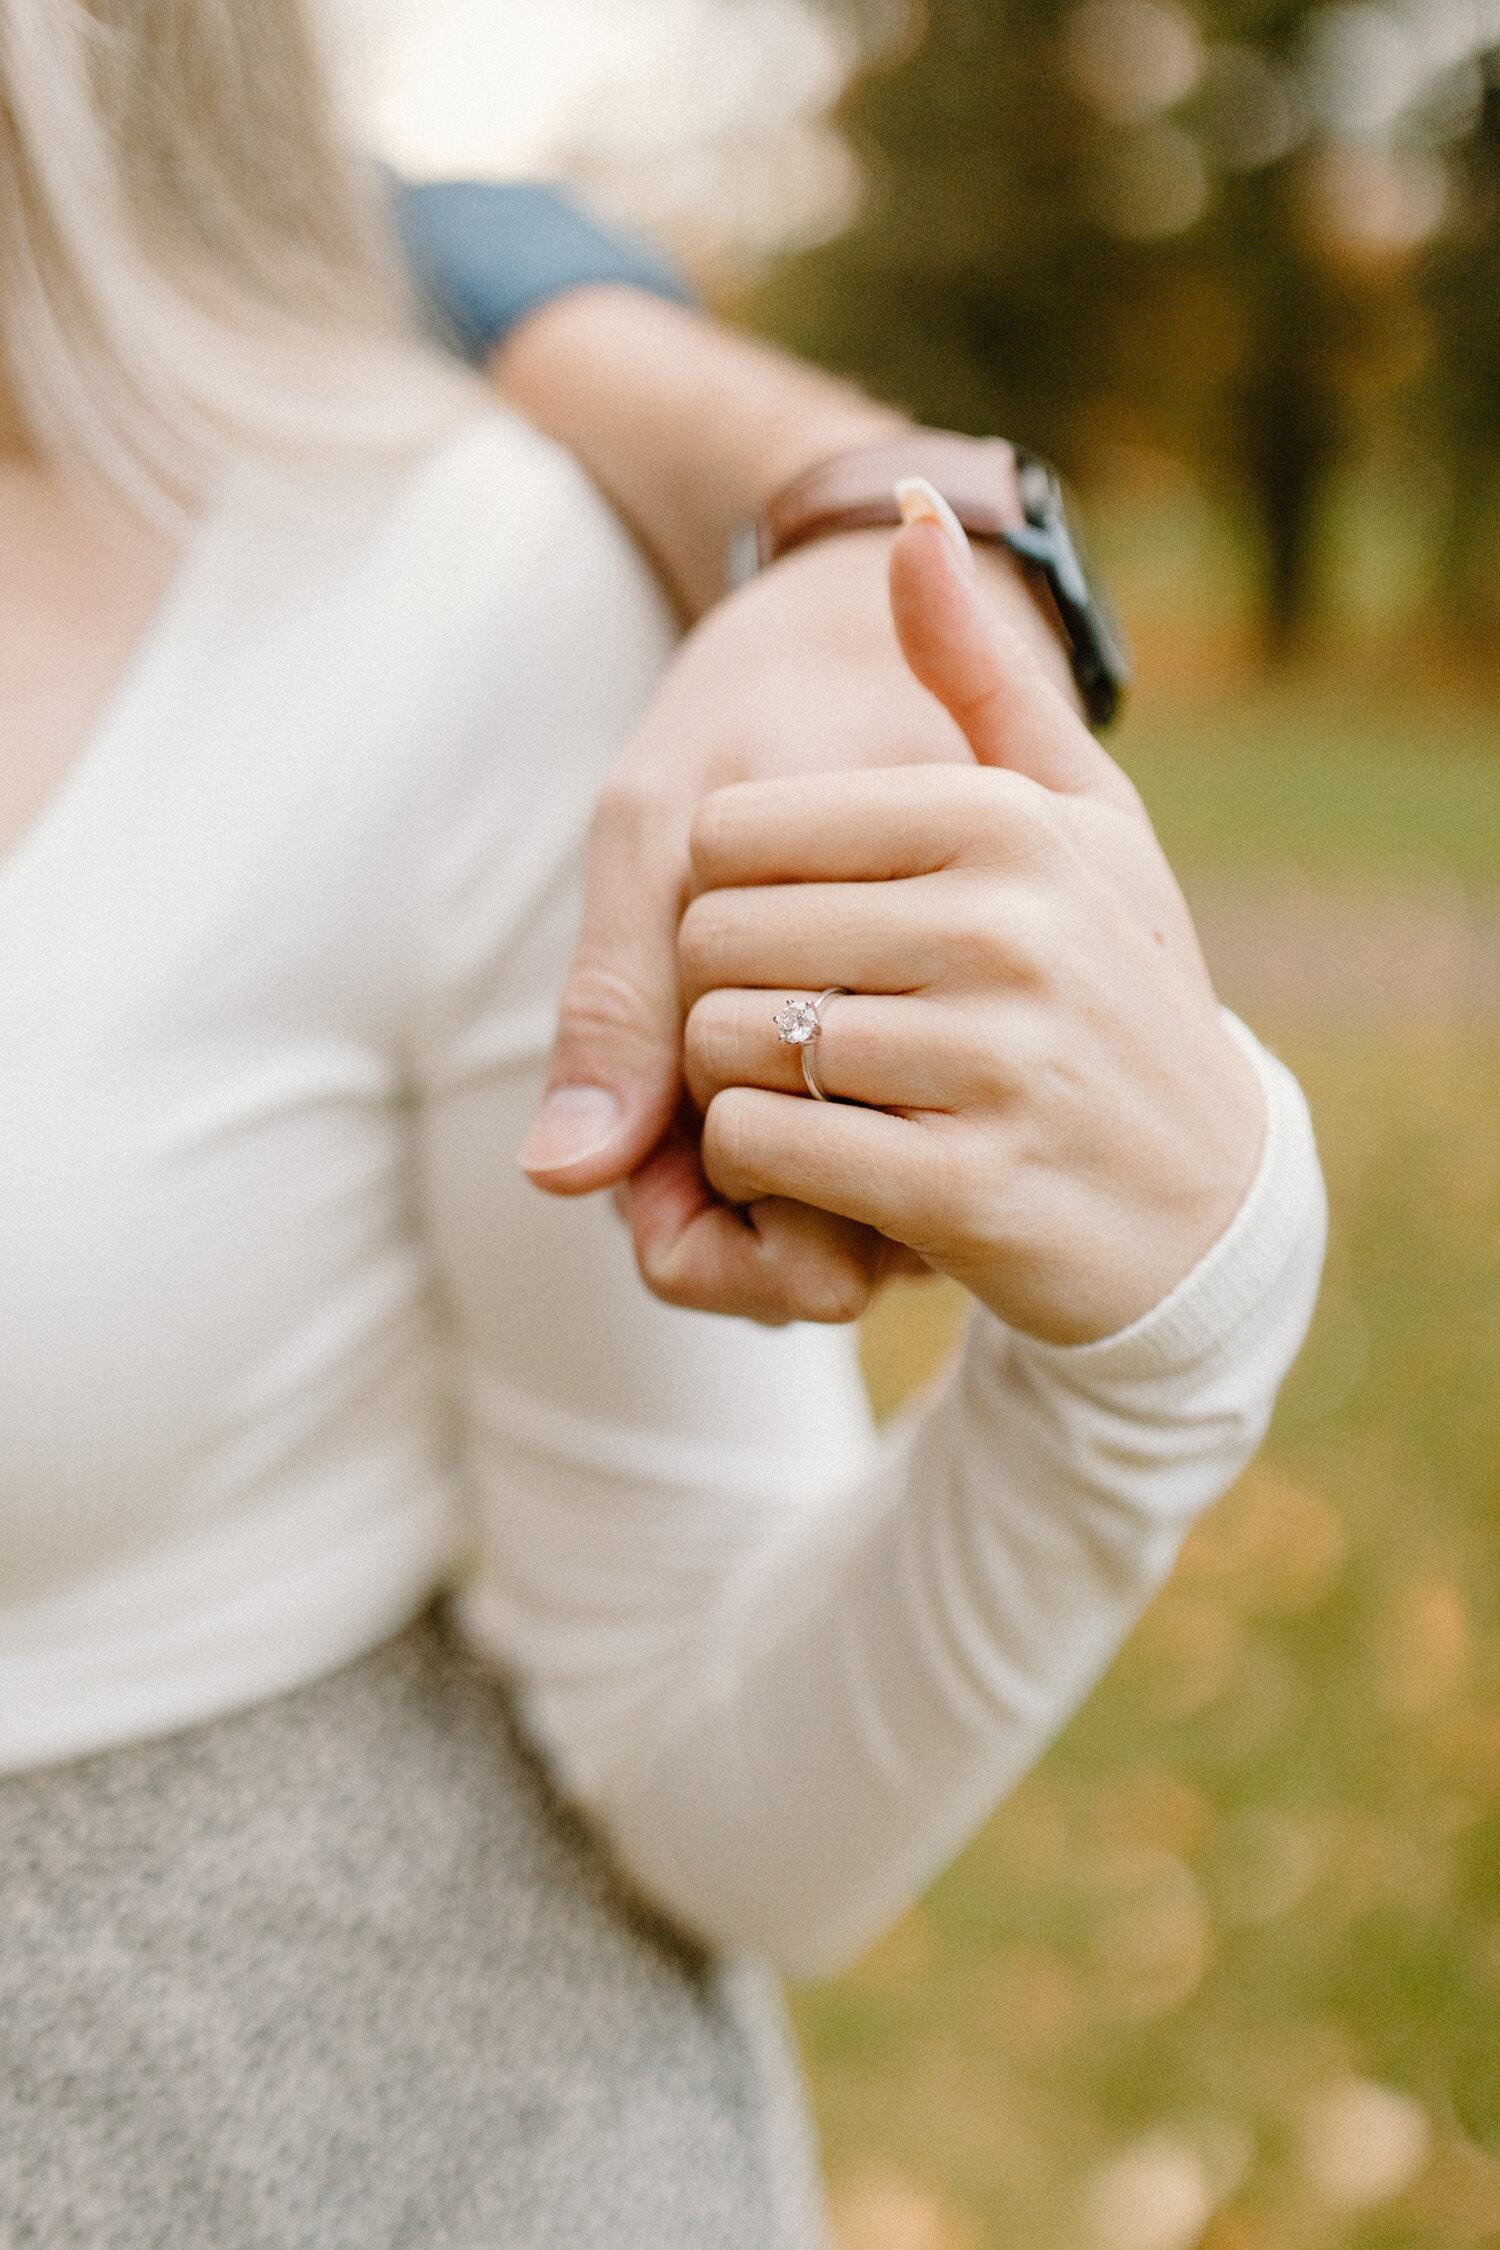  During their autumn engagement session in Quebec, Canada, Chelsea Mason Photography captures an up-close detailed shot of this engaged couple holding hands and flaunting her engagement ring. white gold solitaire diamond engagement ring, engaged coup